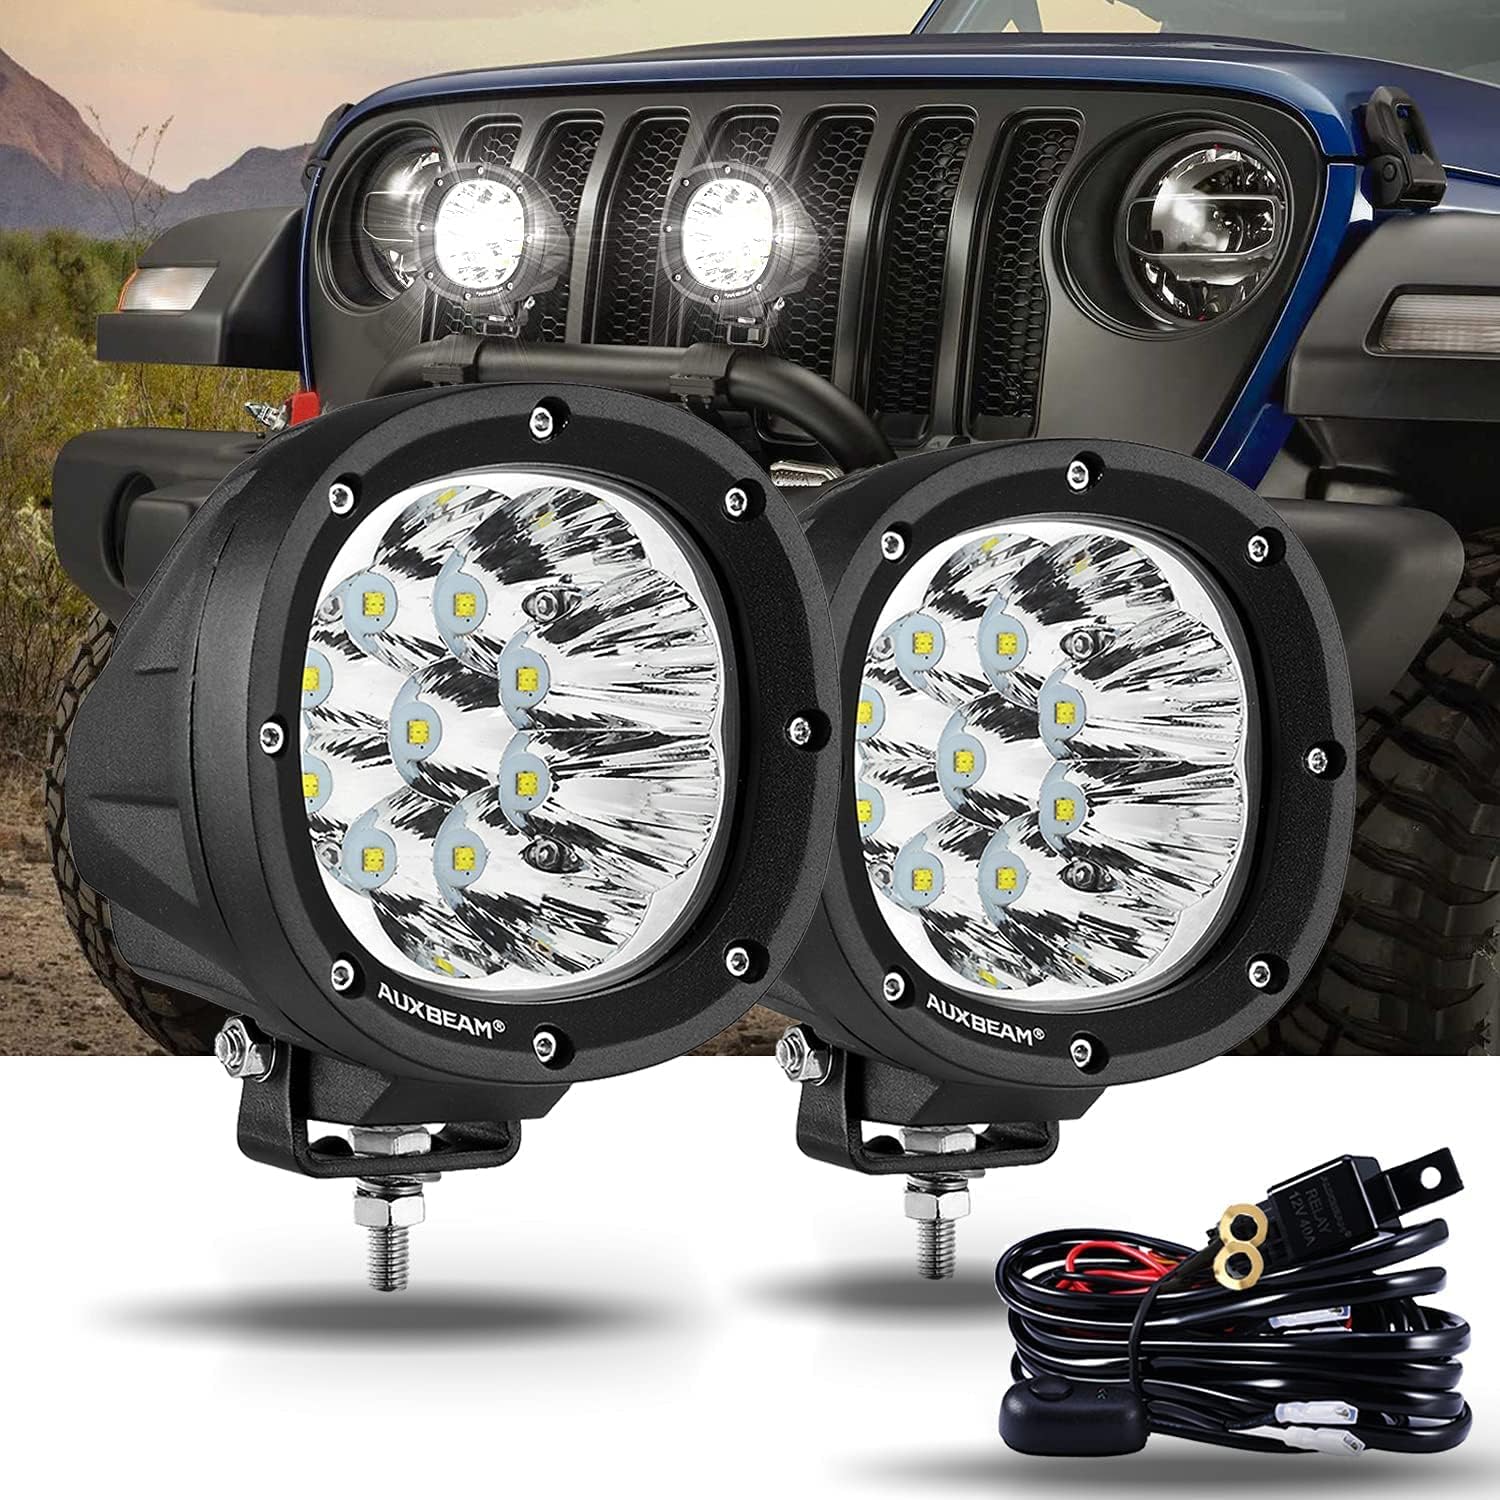 AUXBEAM 5"inch 40W  Flood Beam LED Work Light Bar Offroad for Ford Driving